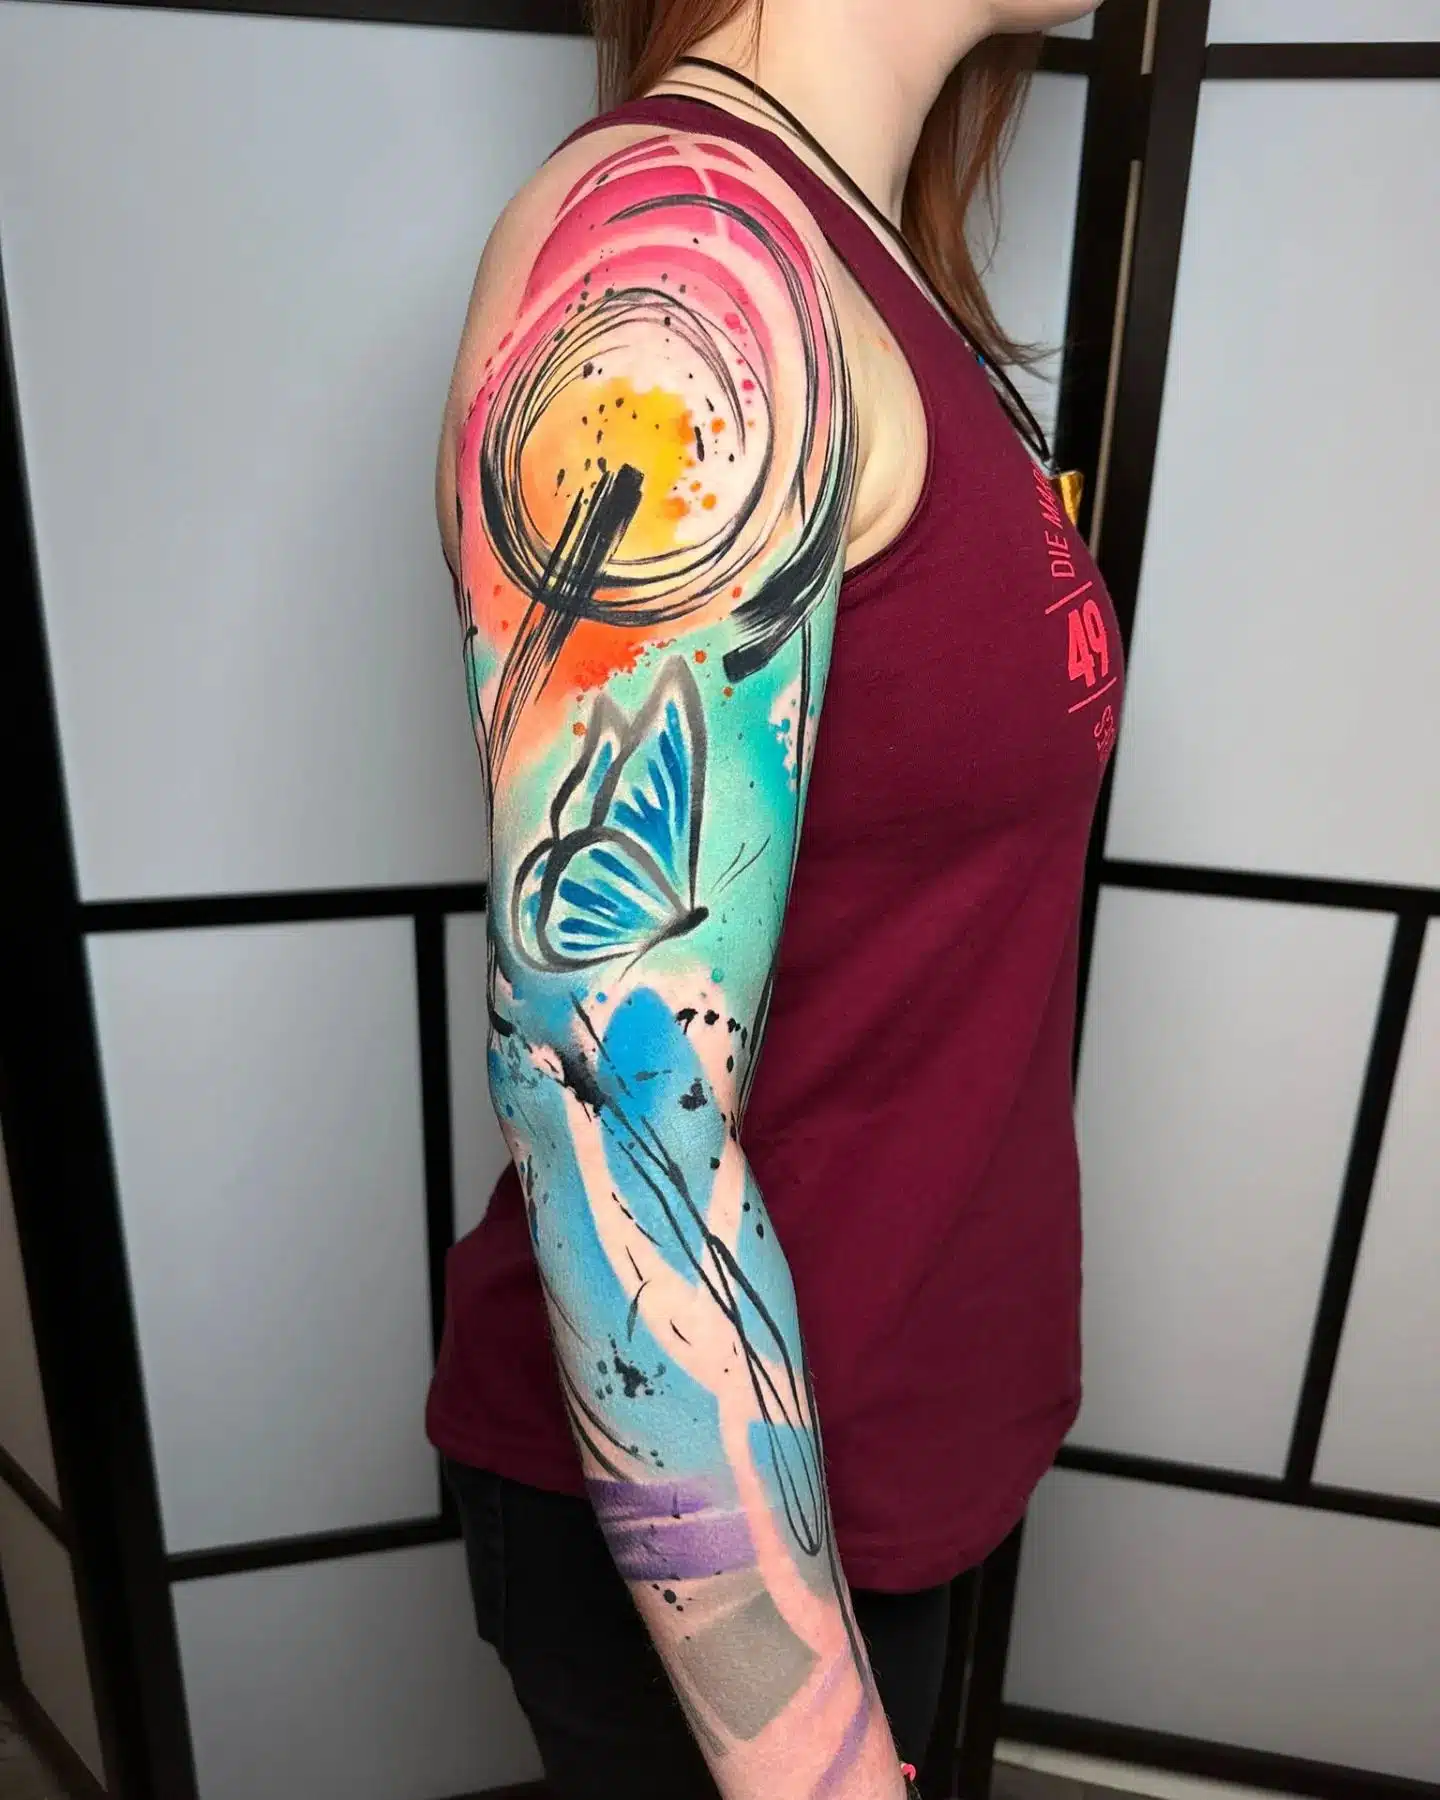 Beautiful avant-garde sleeve freshly finished by Noemi for lovely Angelika! More of these please!
noemi_tattoo 

Supplies from our sponsors magnumtattoosupplies.uk 

Done using (Noemis sponsor)
dragonhawkofficial 
dragonhawkmachine 
And
unigloves 
worldfamousink 

    tattoosnob uktta totaltattoo  barber_dts             